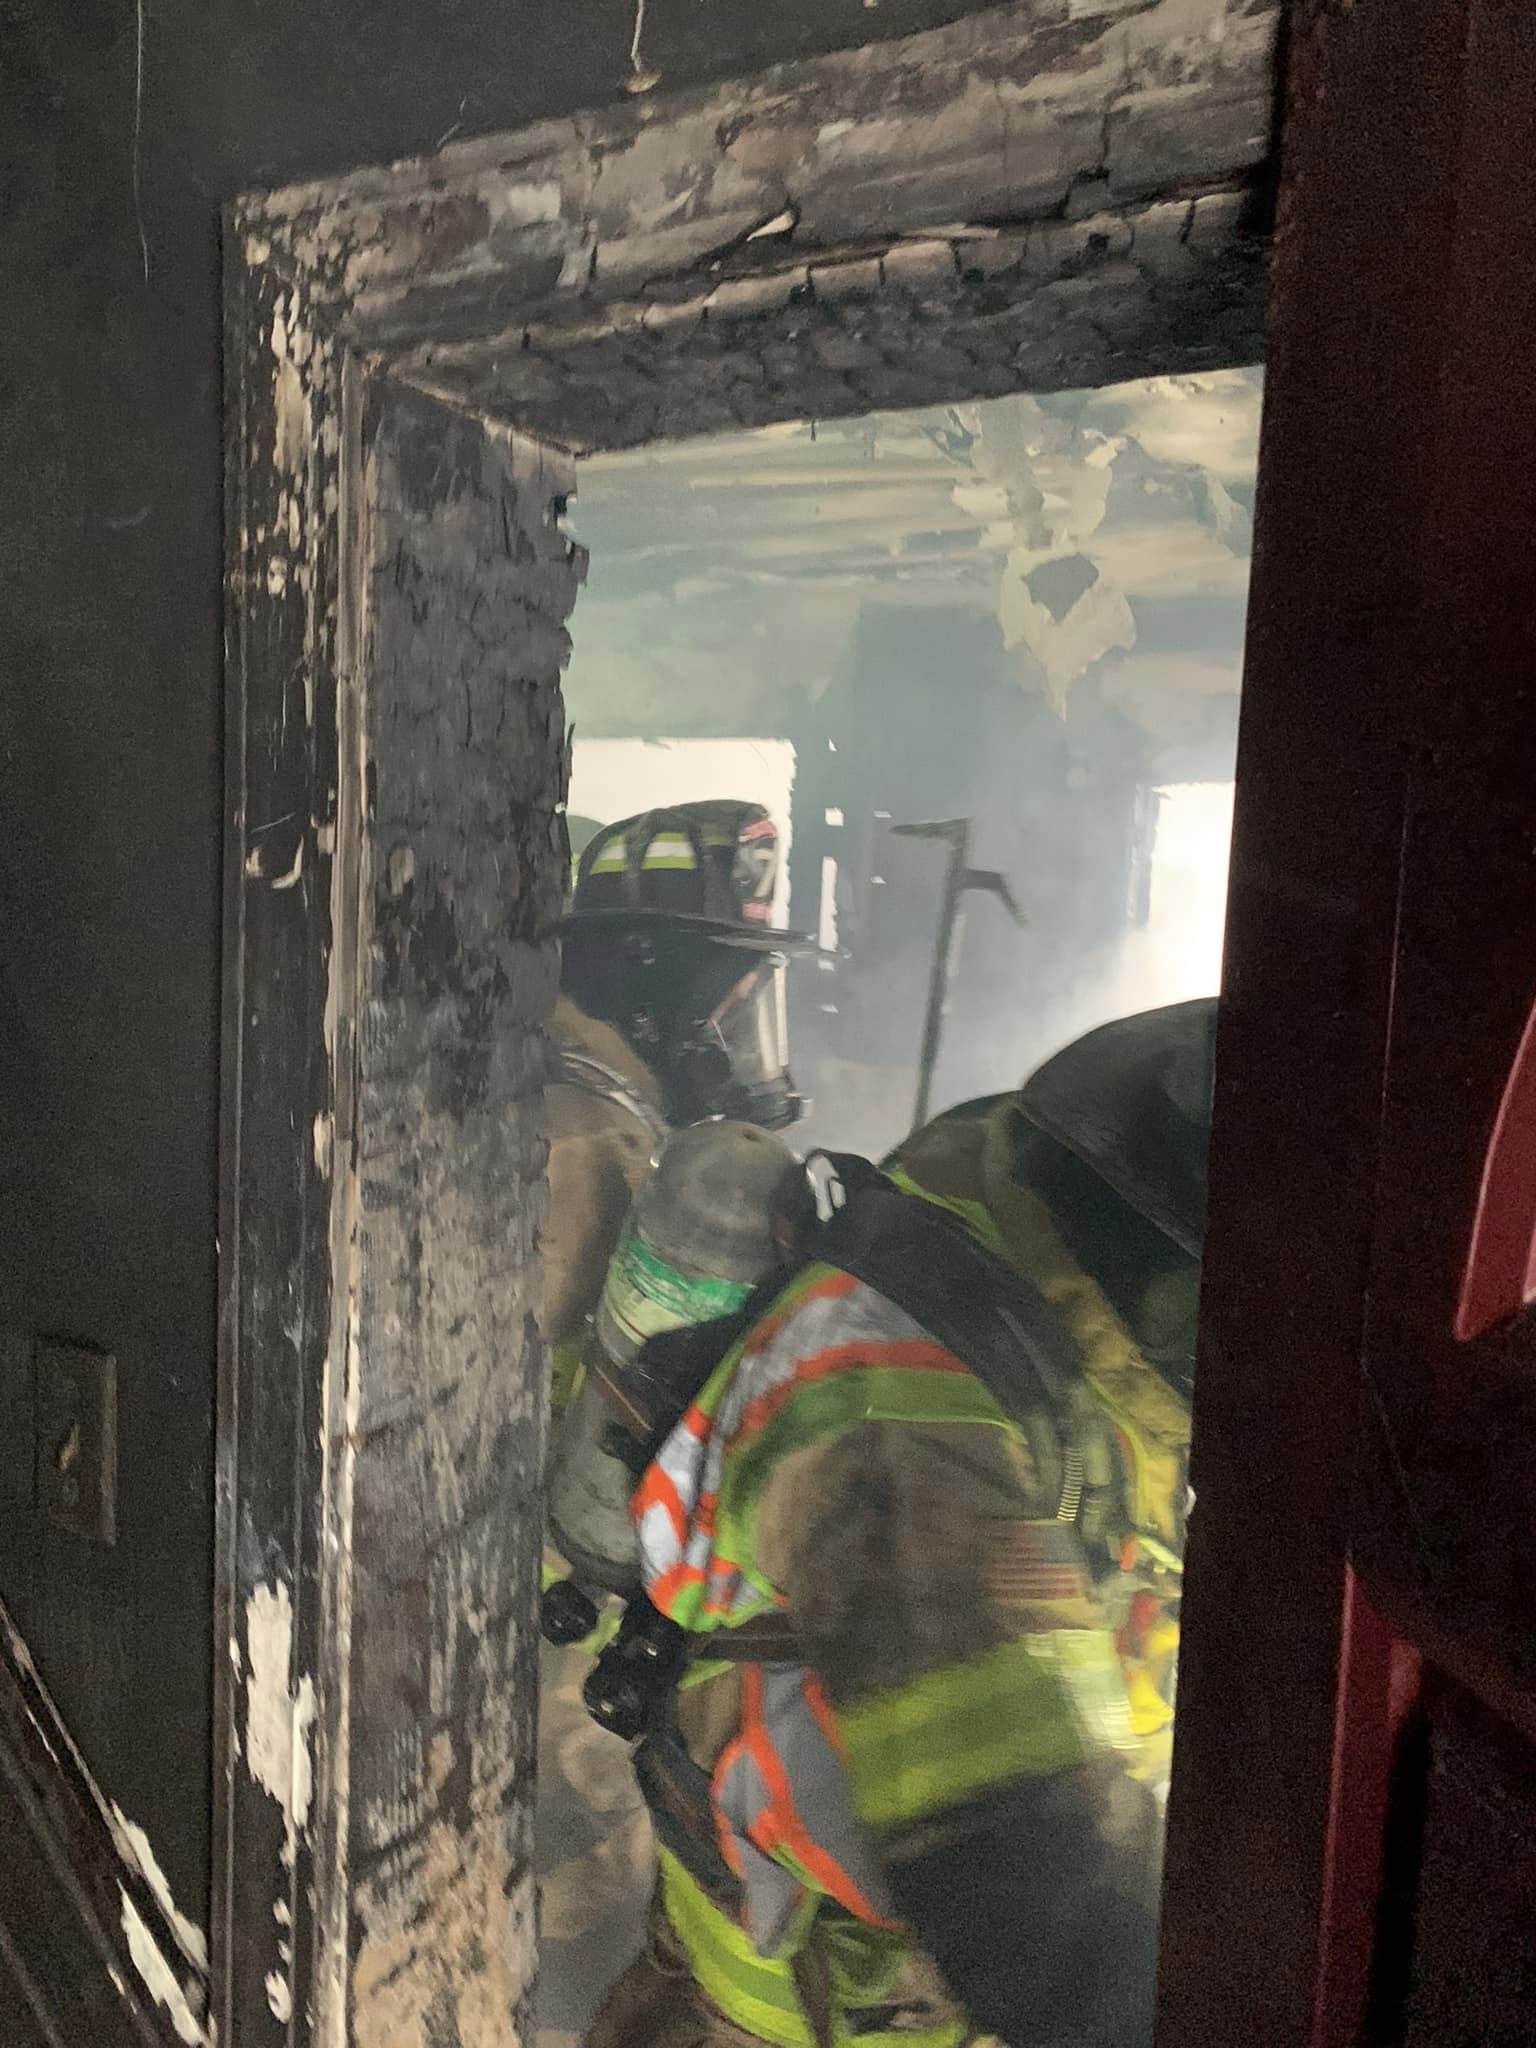 Firefighters respond to house fire on Adams Street